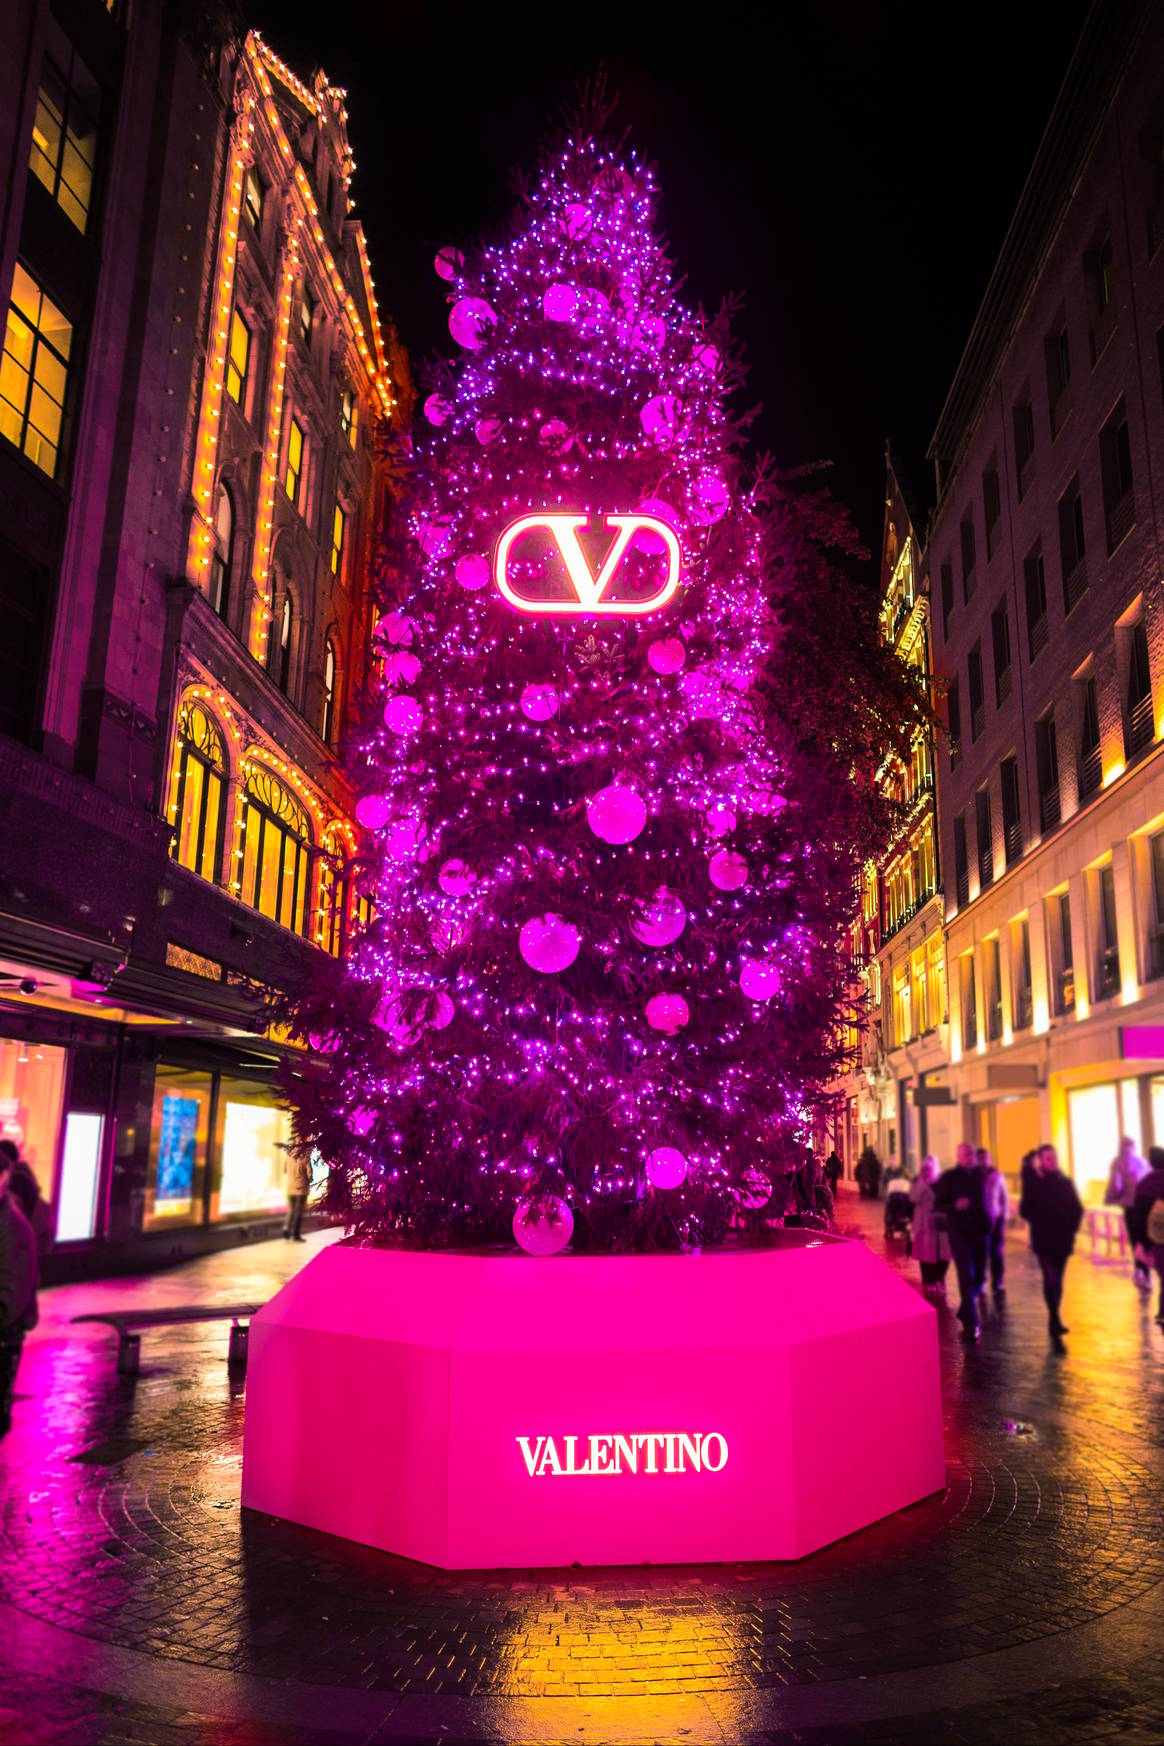 Valentino Christmas takeover at Harrods, London.